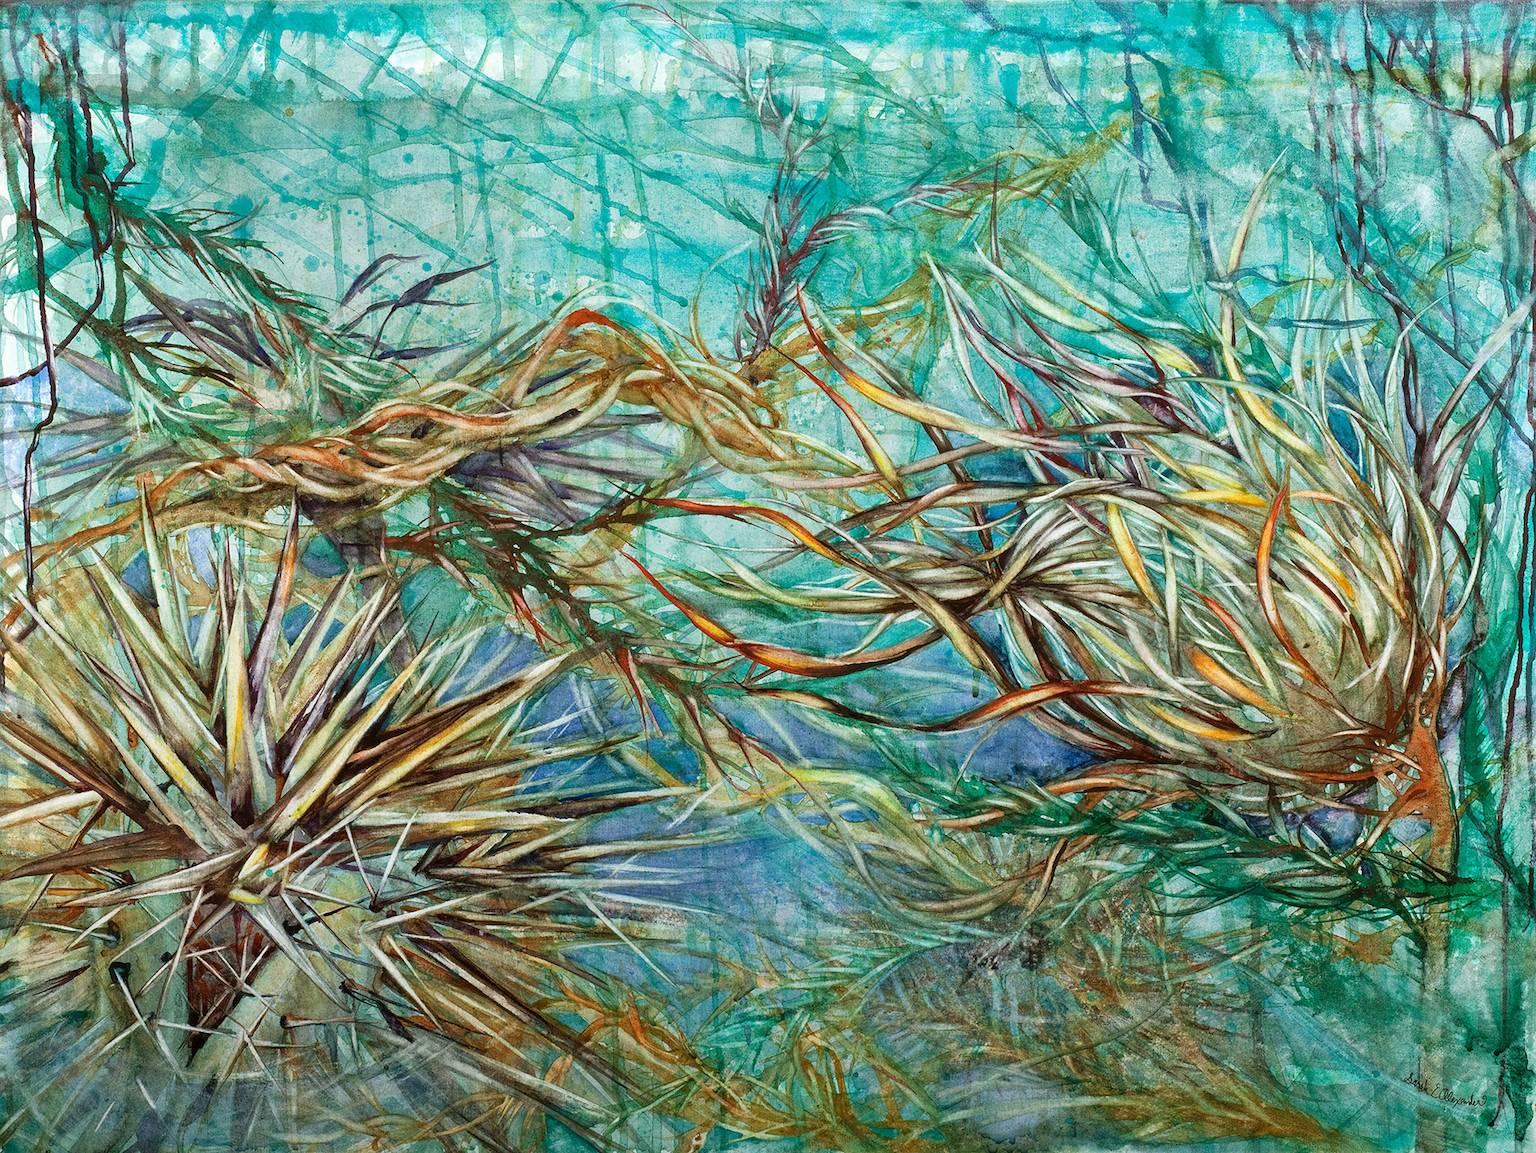 "Undertow", abstract, botanical, watercolor, painting, turquoises, blues